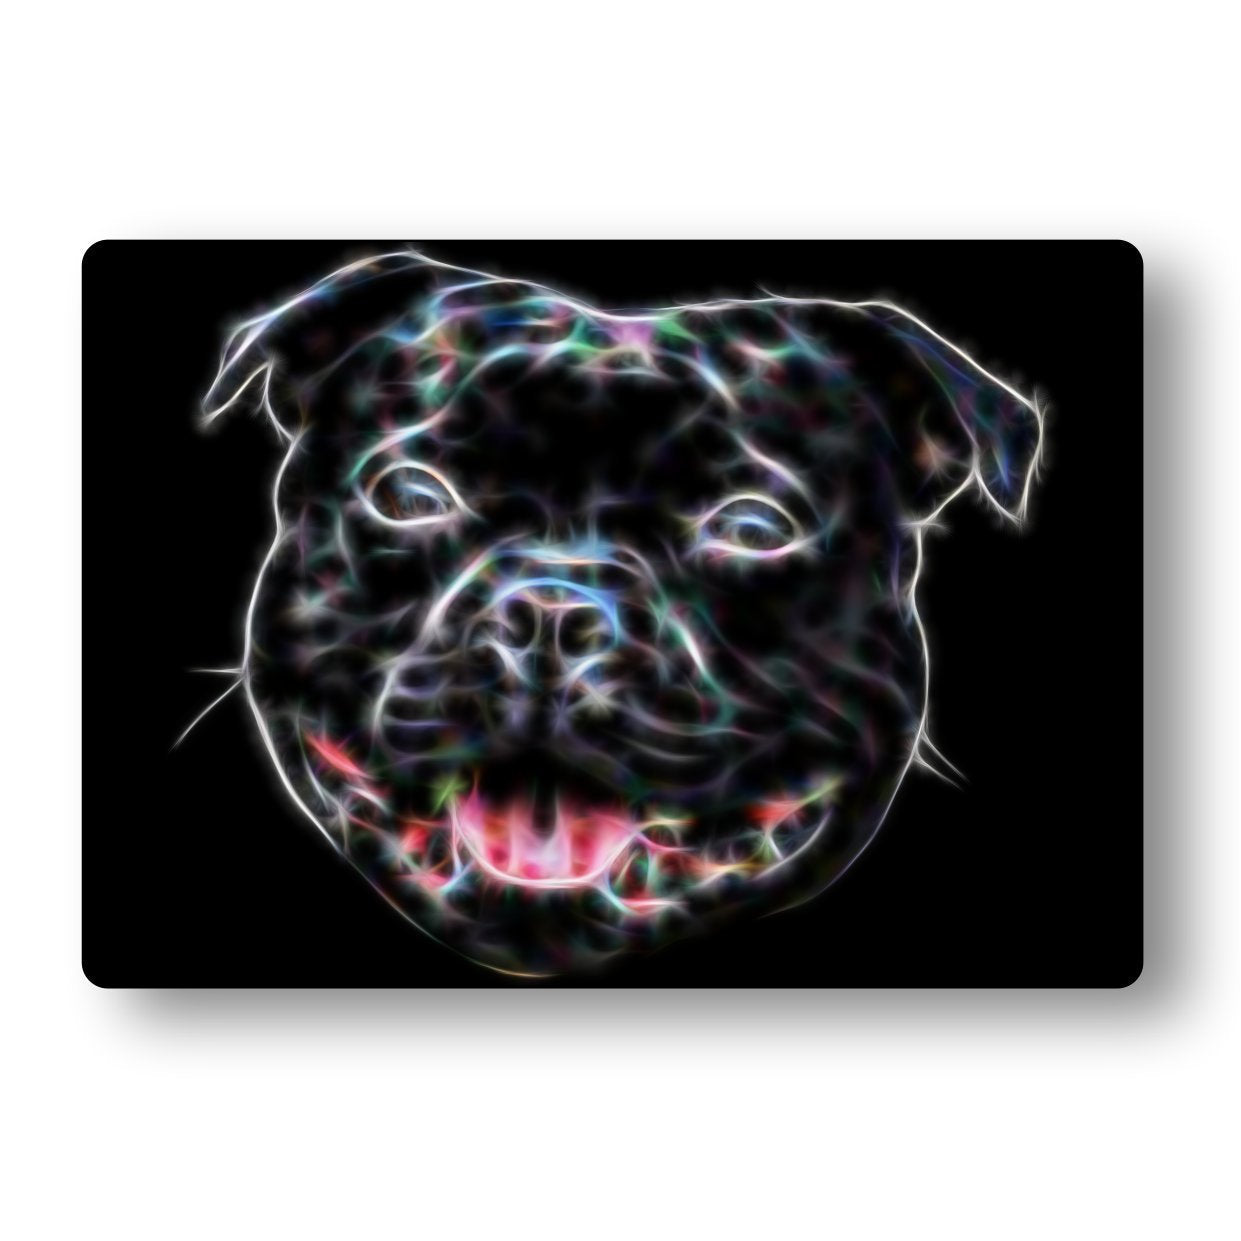 Black Staffordshire Bull Terrier Metal Plaque with Fractal Art Design. Also available as Mouse Pad, Keychain or Coaster.